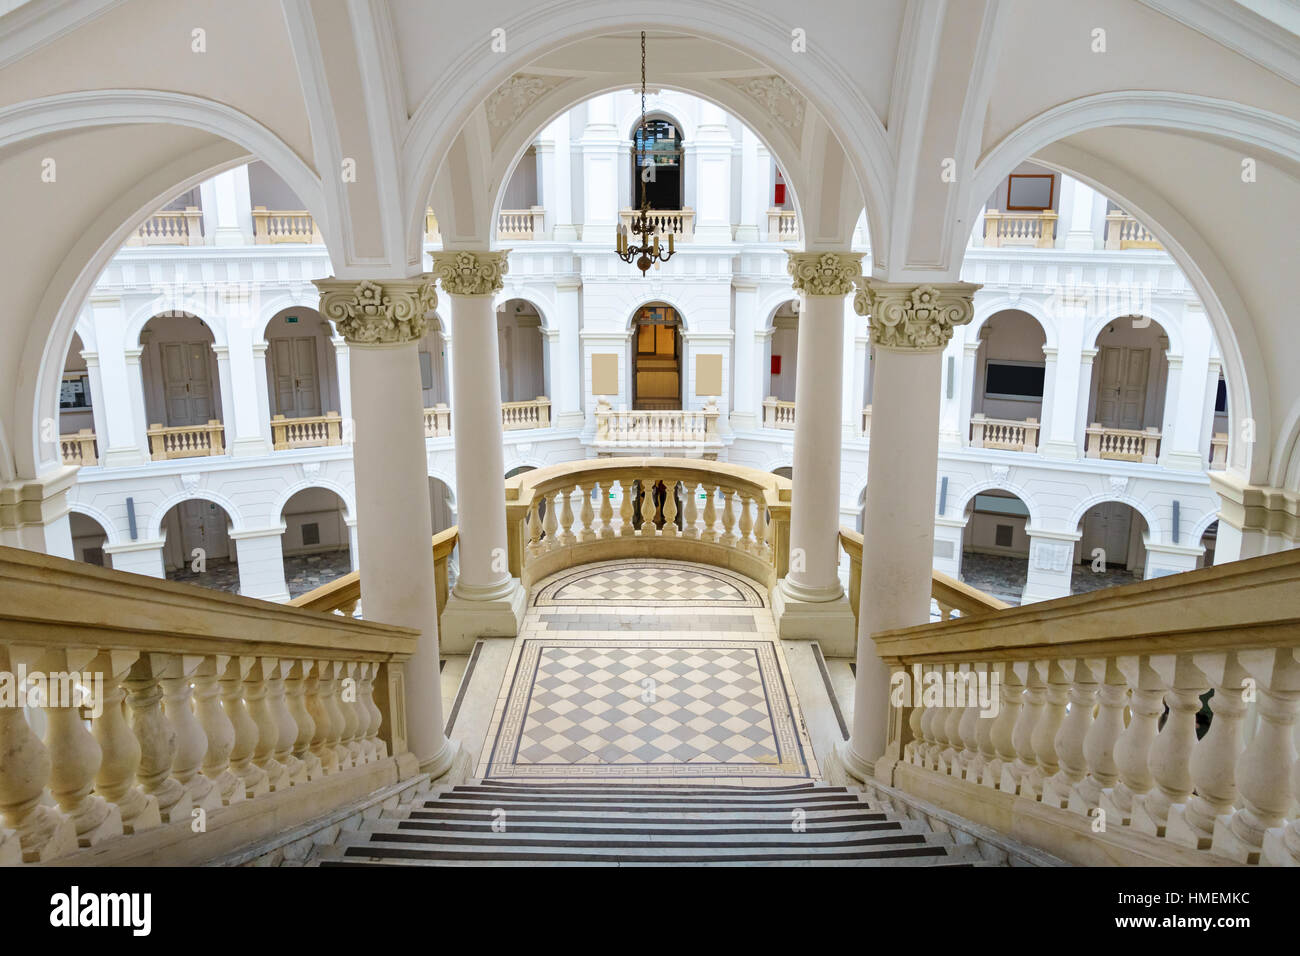 Ornate staircase of the Warsaw University of Technology, a public university in Warsaw, Poland. Stock Photo